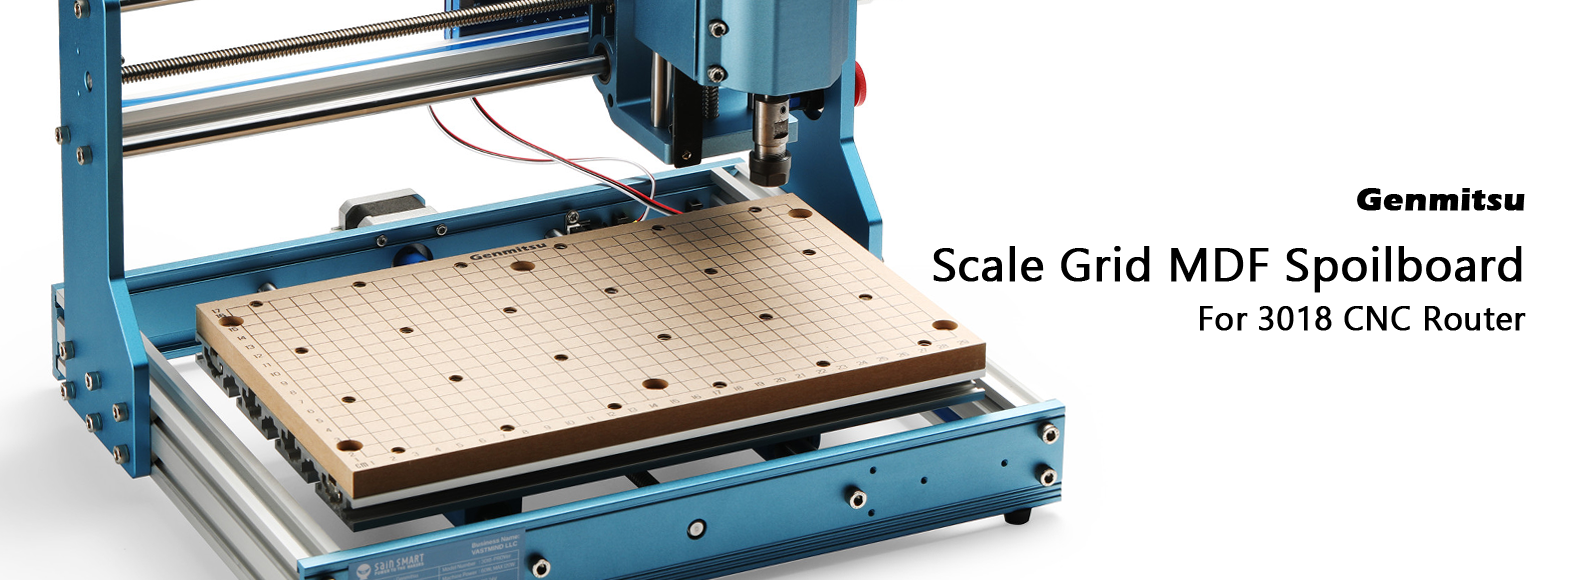 Genmitsu CNC MDF Spoilboard with Scale Grid for 3018 CNC Router | SainSmart